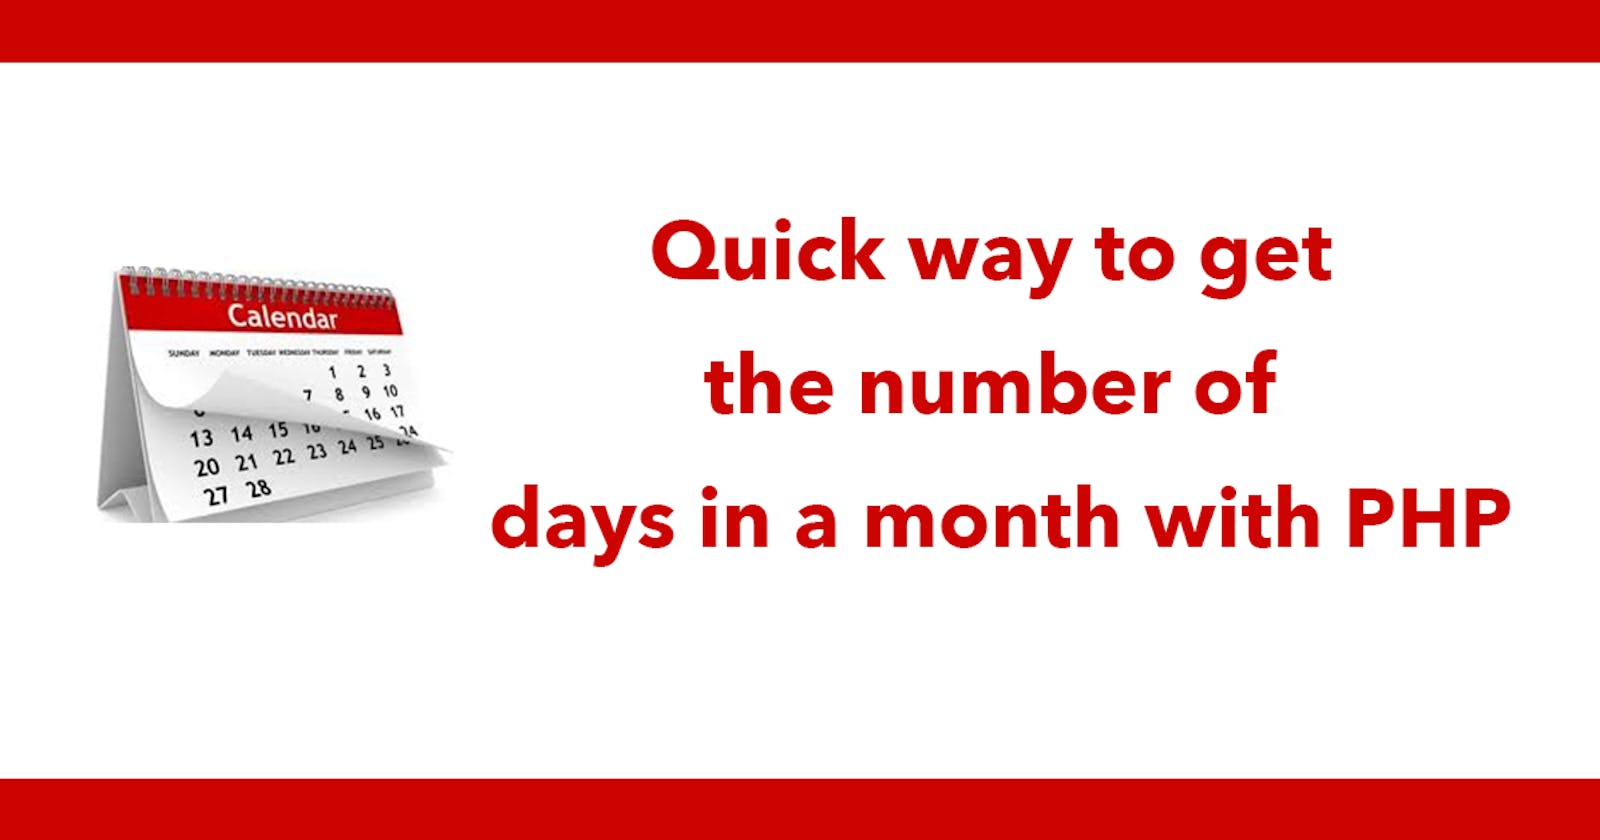 Quick way to get the number of days in a month with PHP